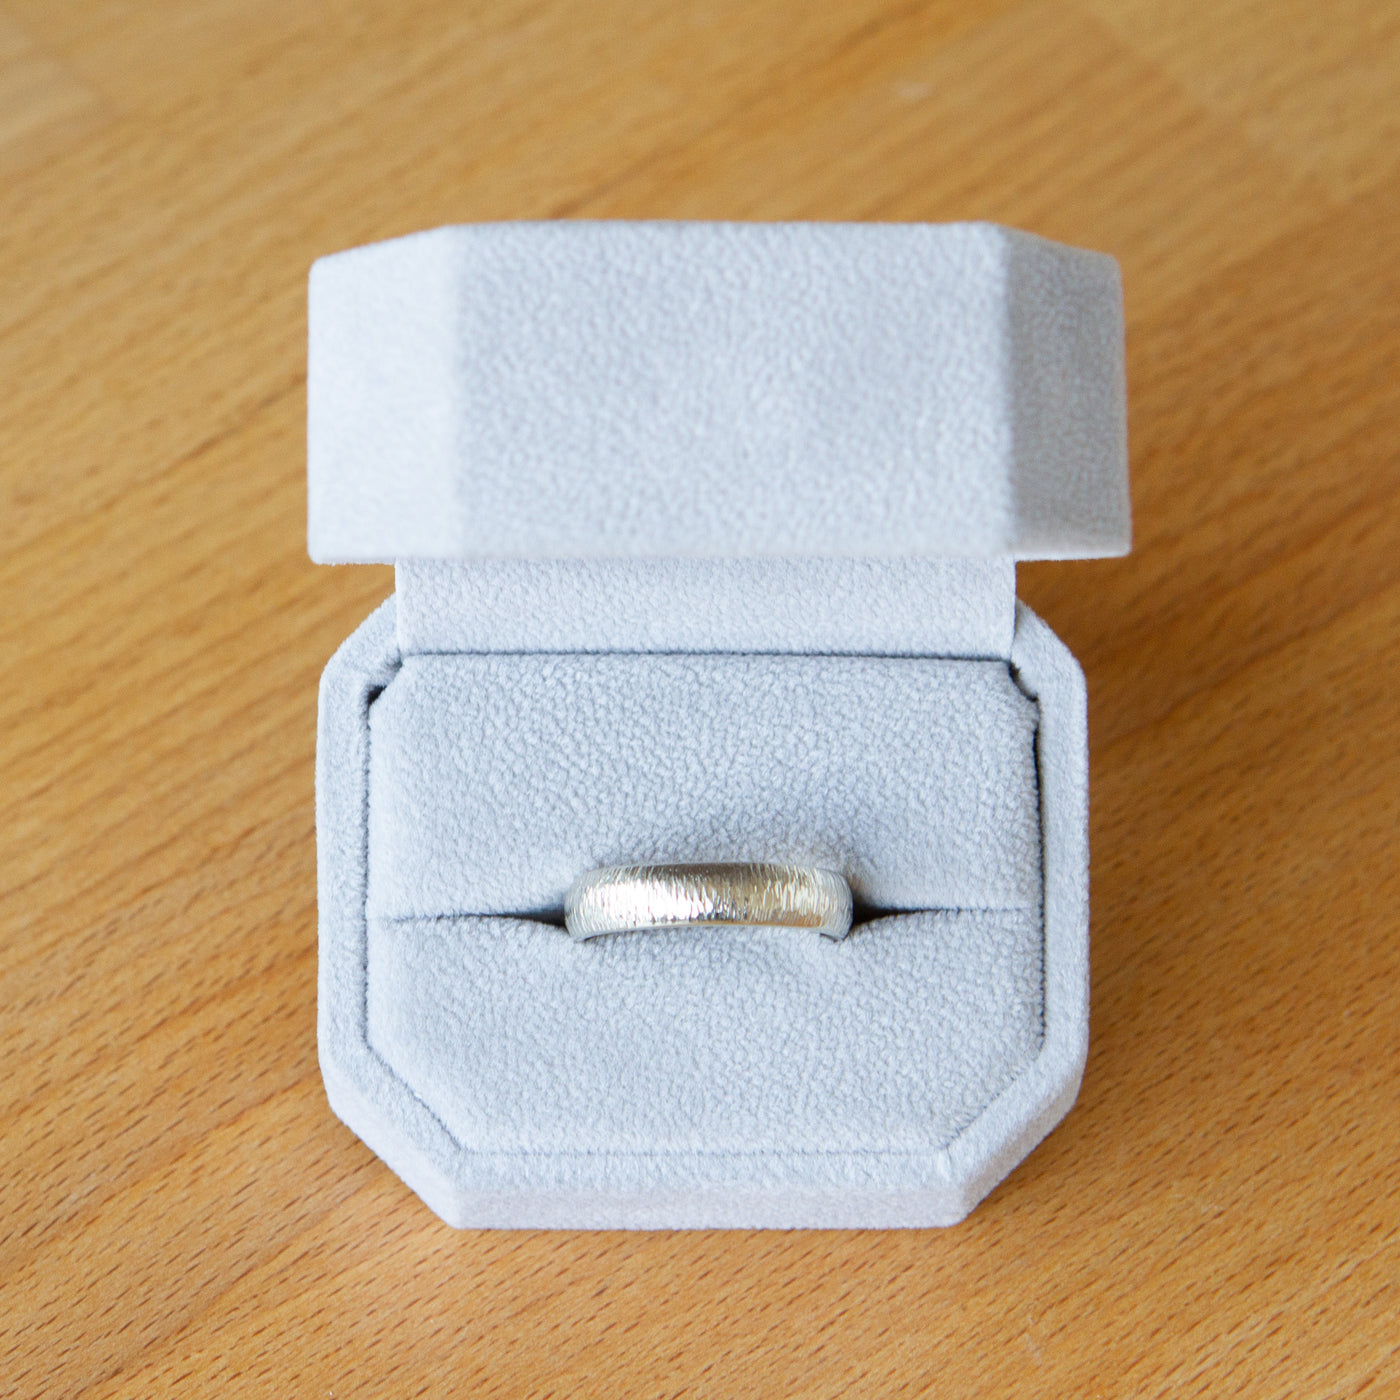 14k white gold half round Zion band in a ring box by Corey Egan